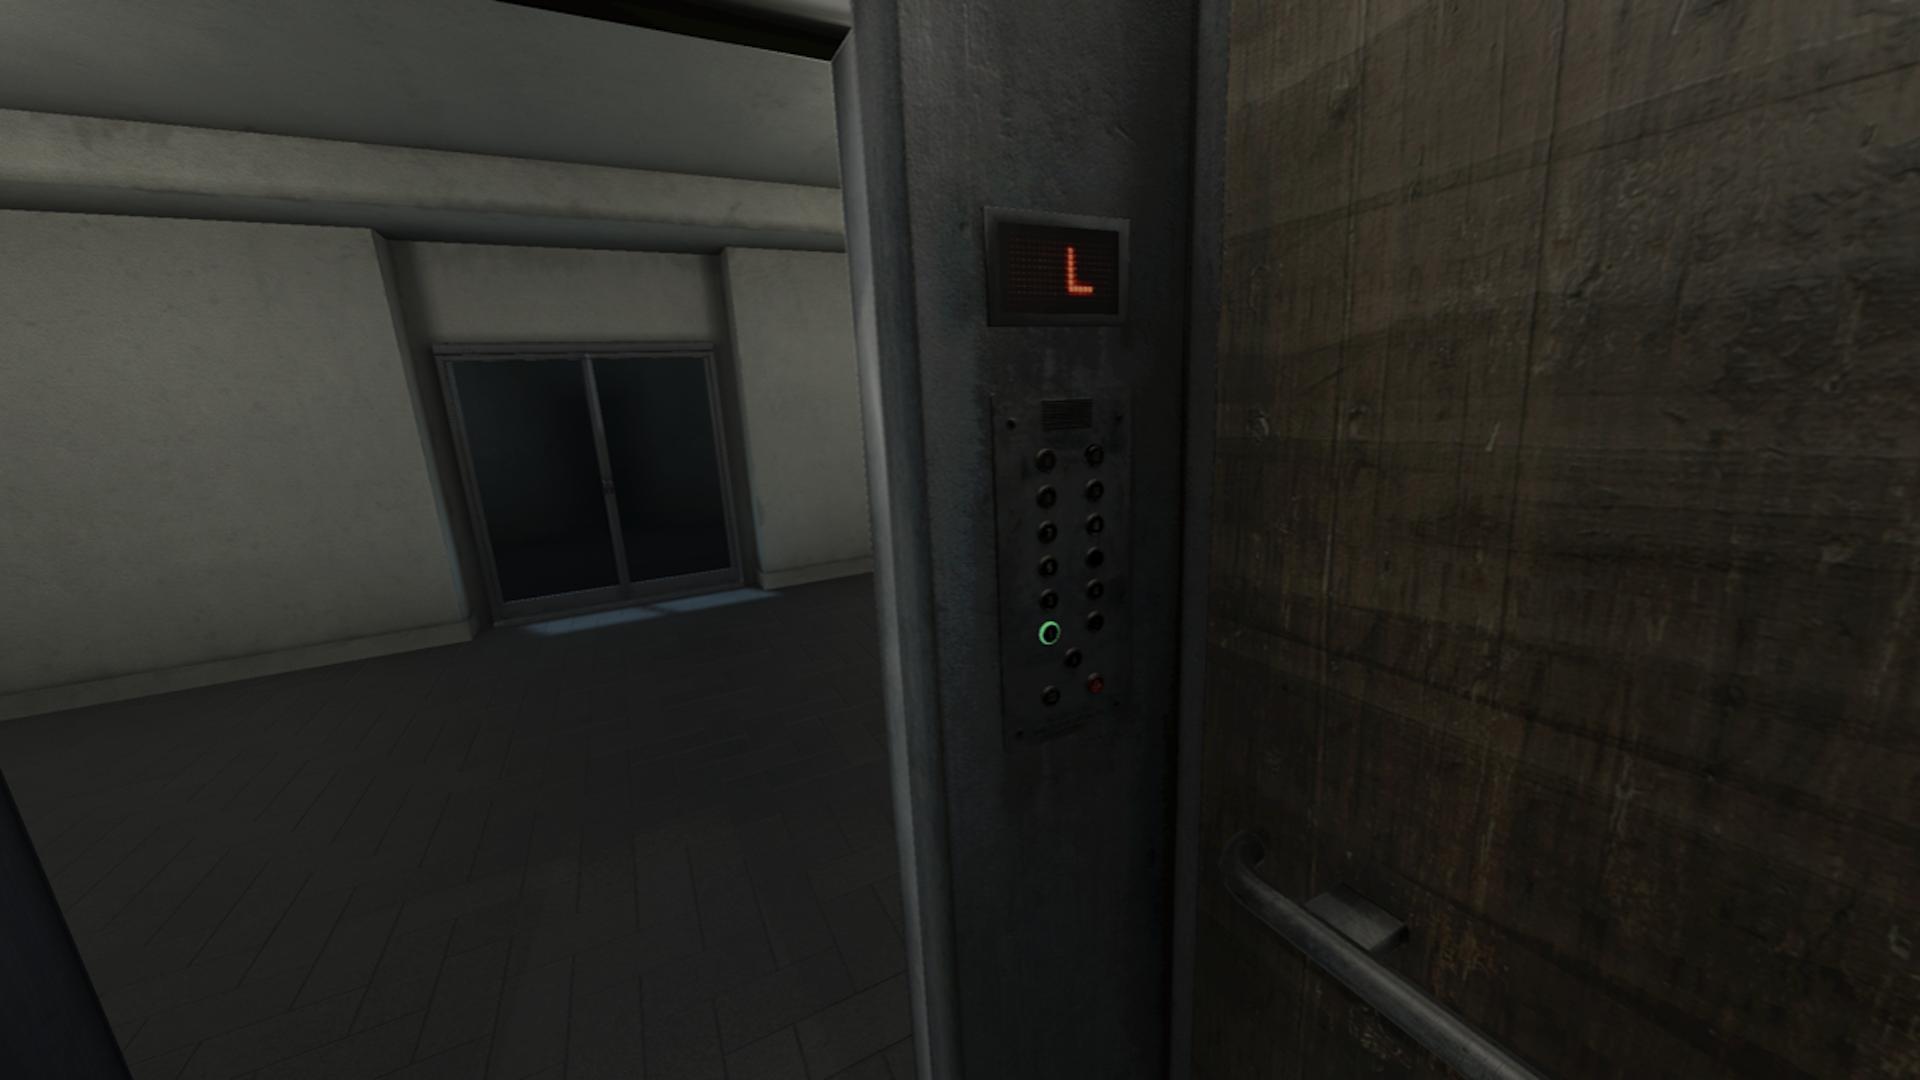 Elevator Horror For Android Apk Download